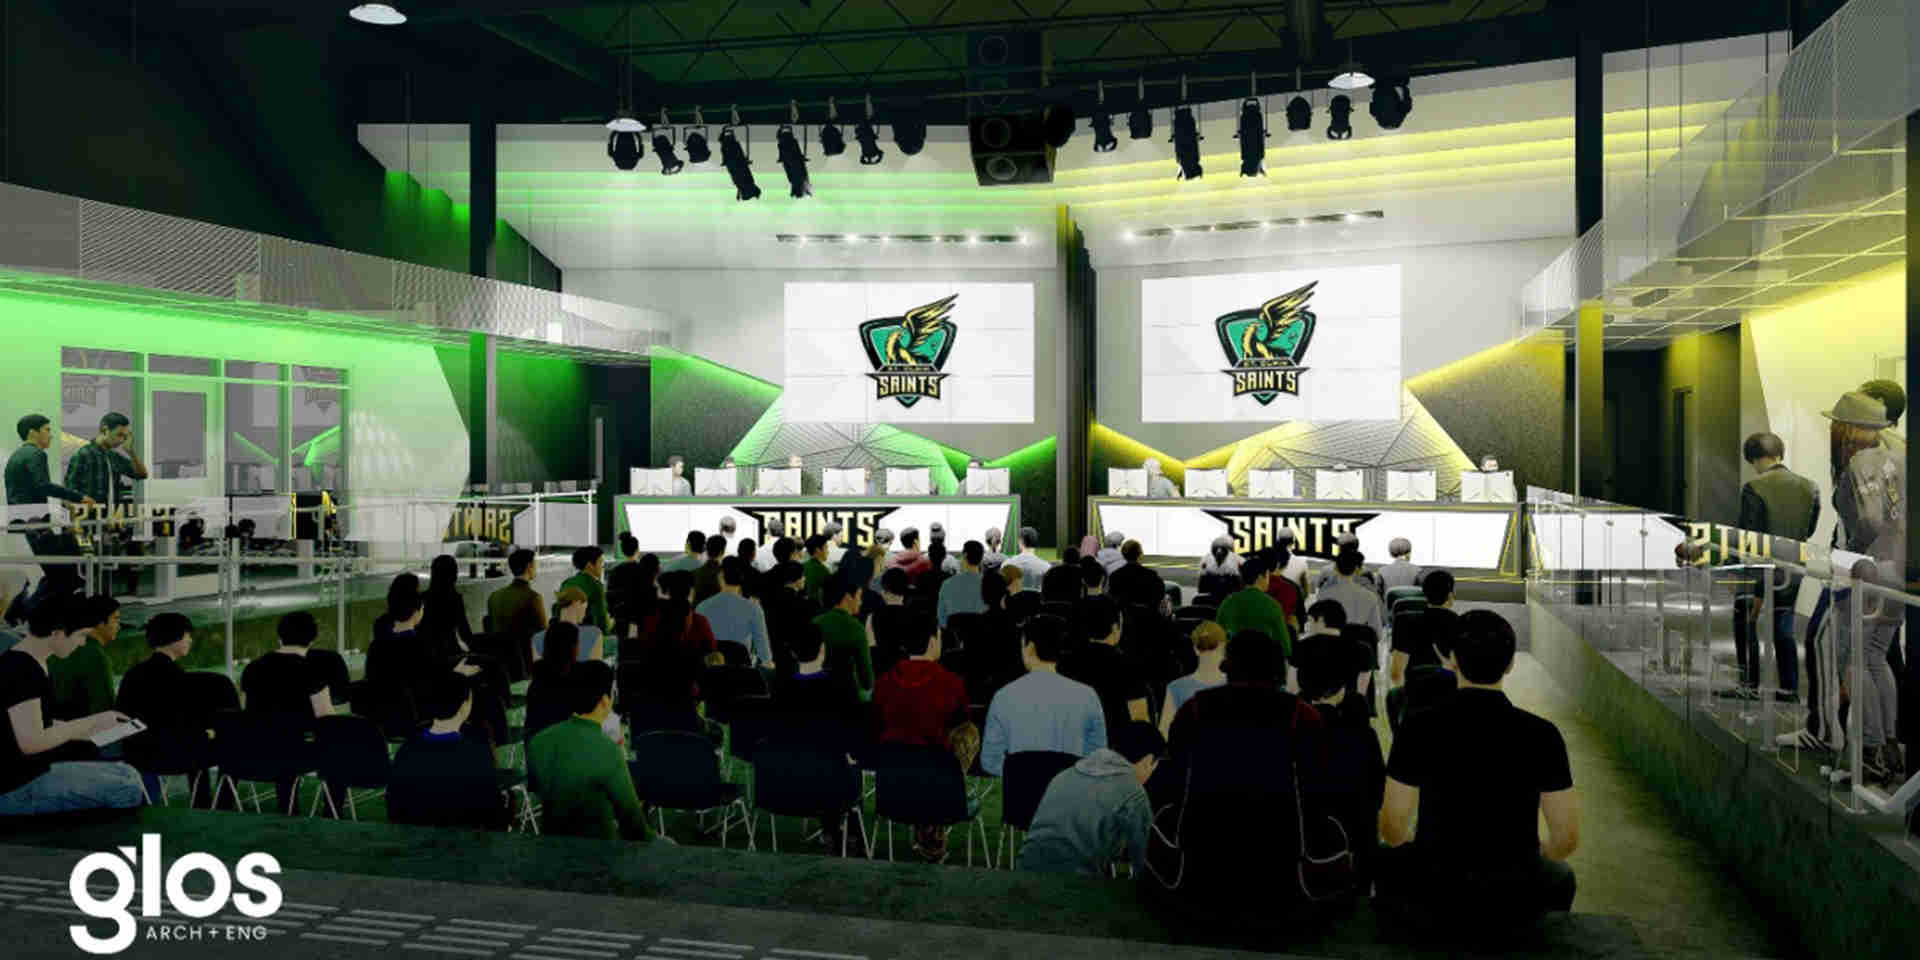 Innovation & News - st-clair-college-esports-arena-concept